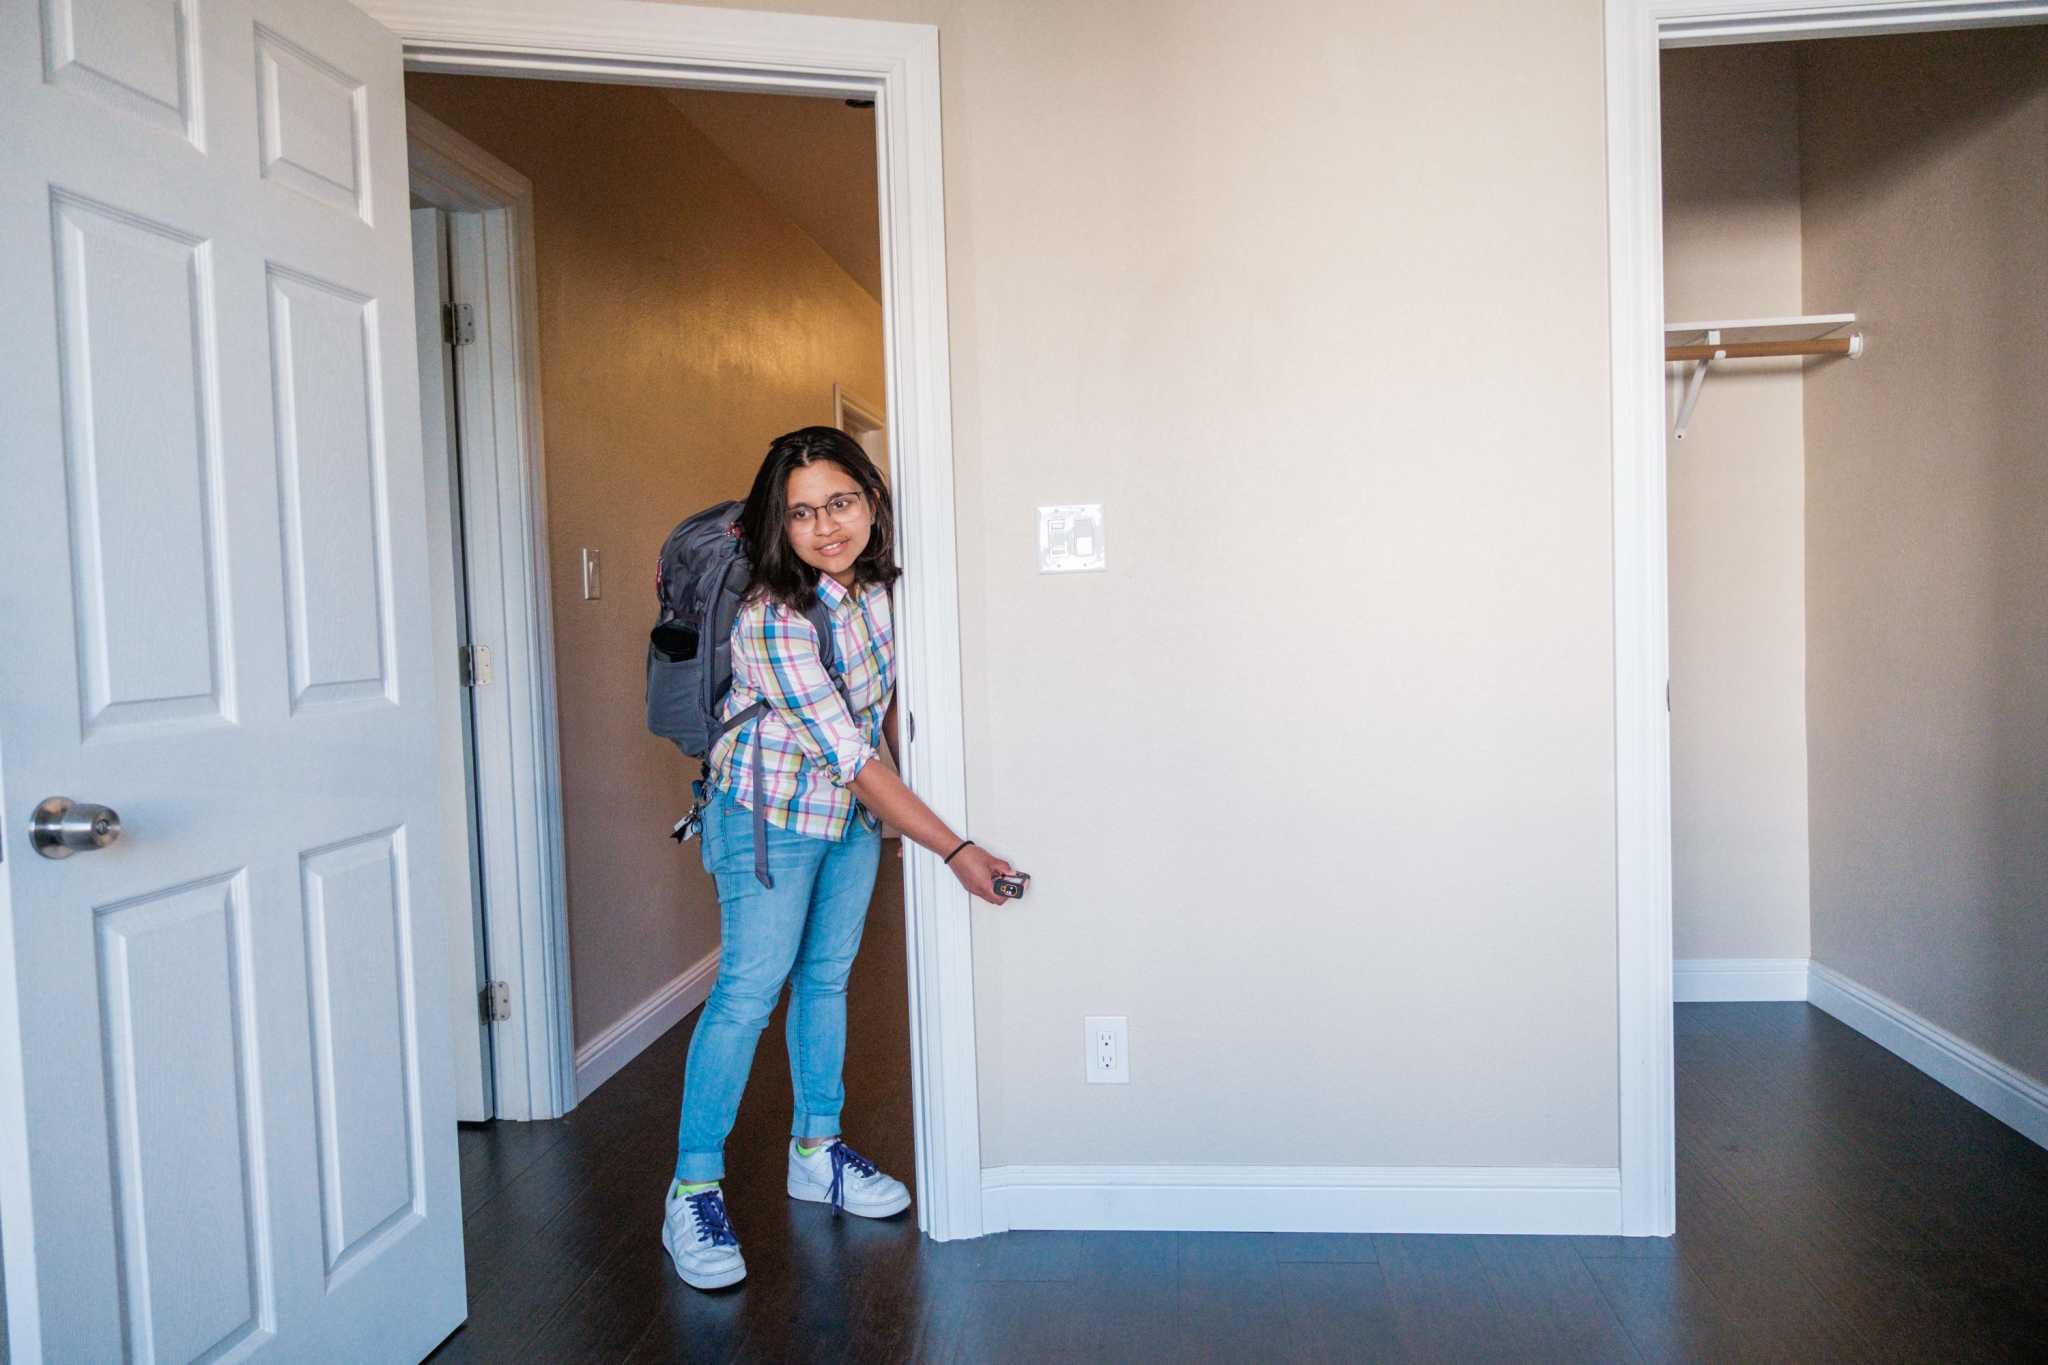 Anusha Datar, who recently moved to San Francisco from Boston, uses a device to measure the size of a room during an open house walk through in San Fr